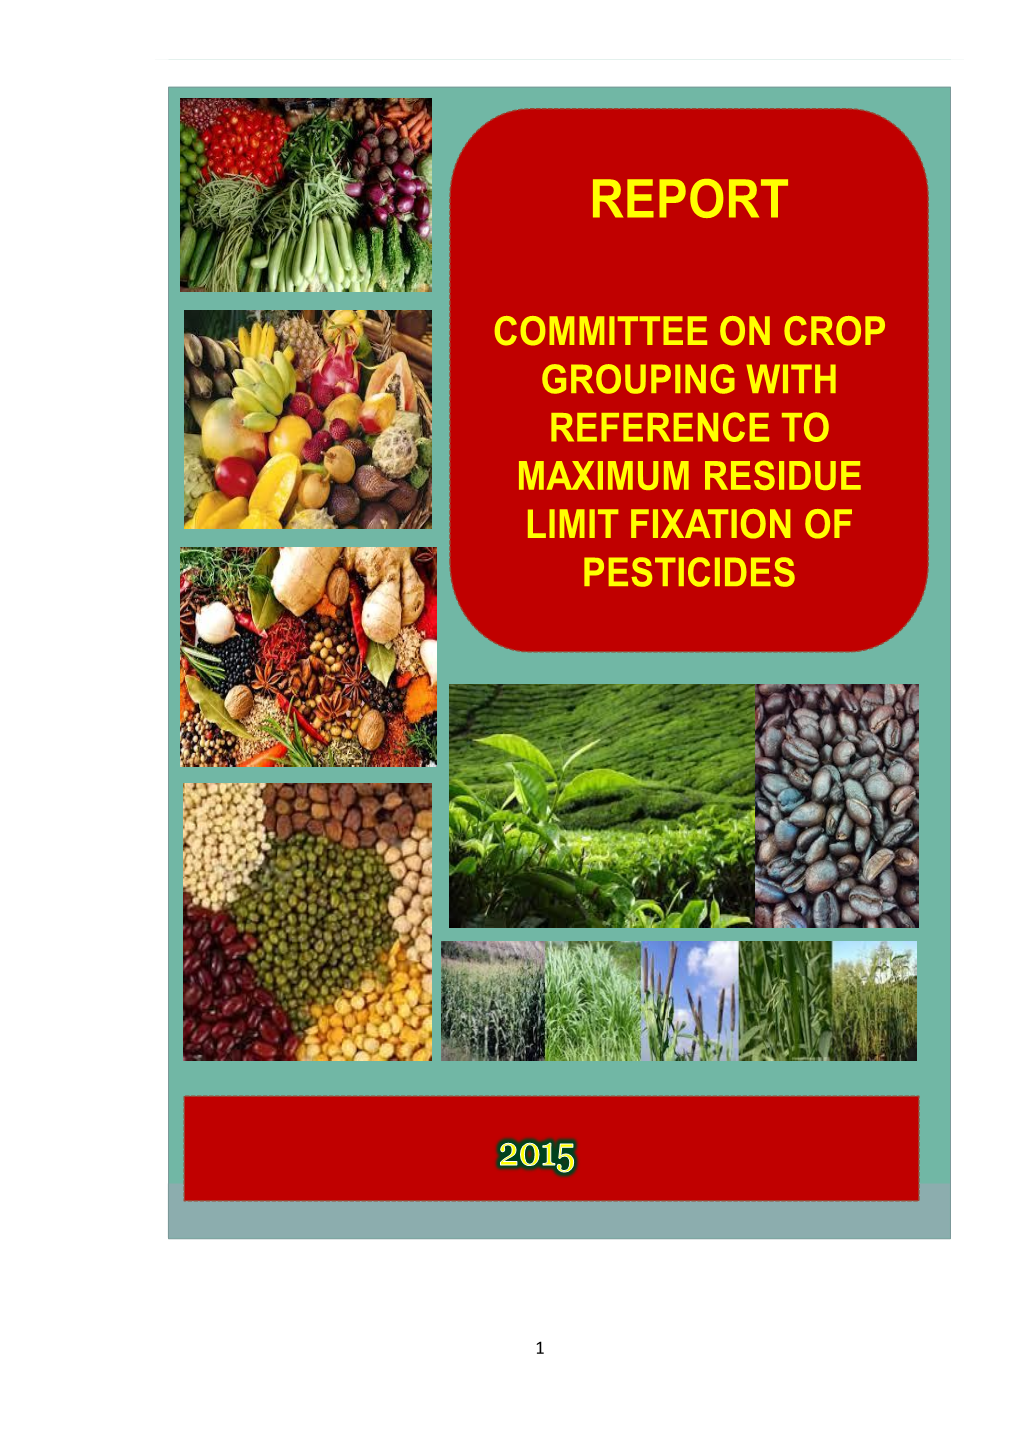 Report of the Committee on Crop Grouping with Reference to Fixation